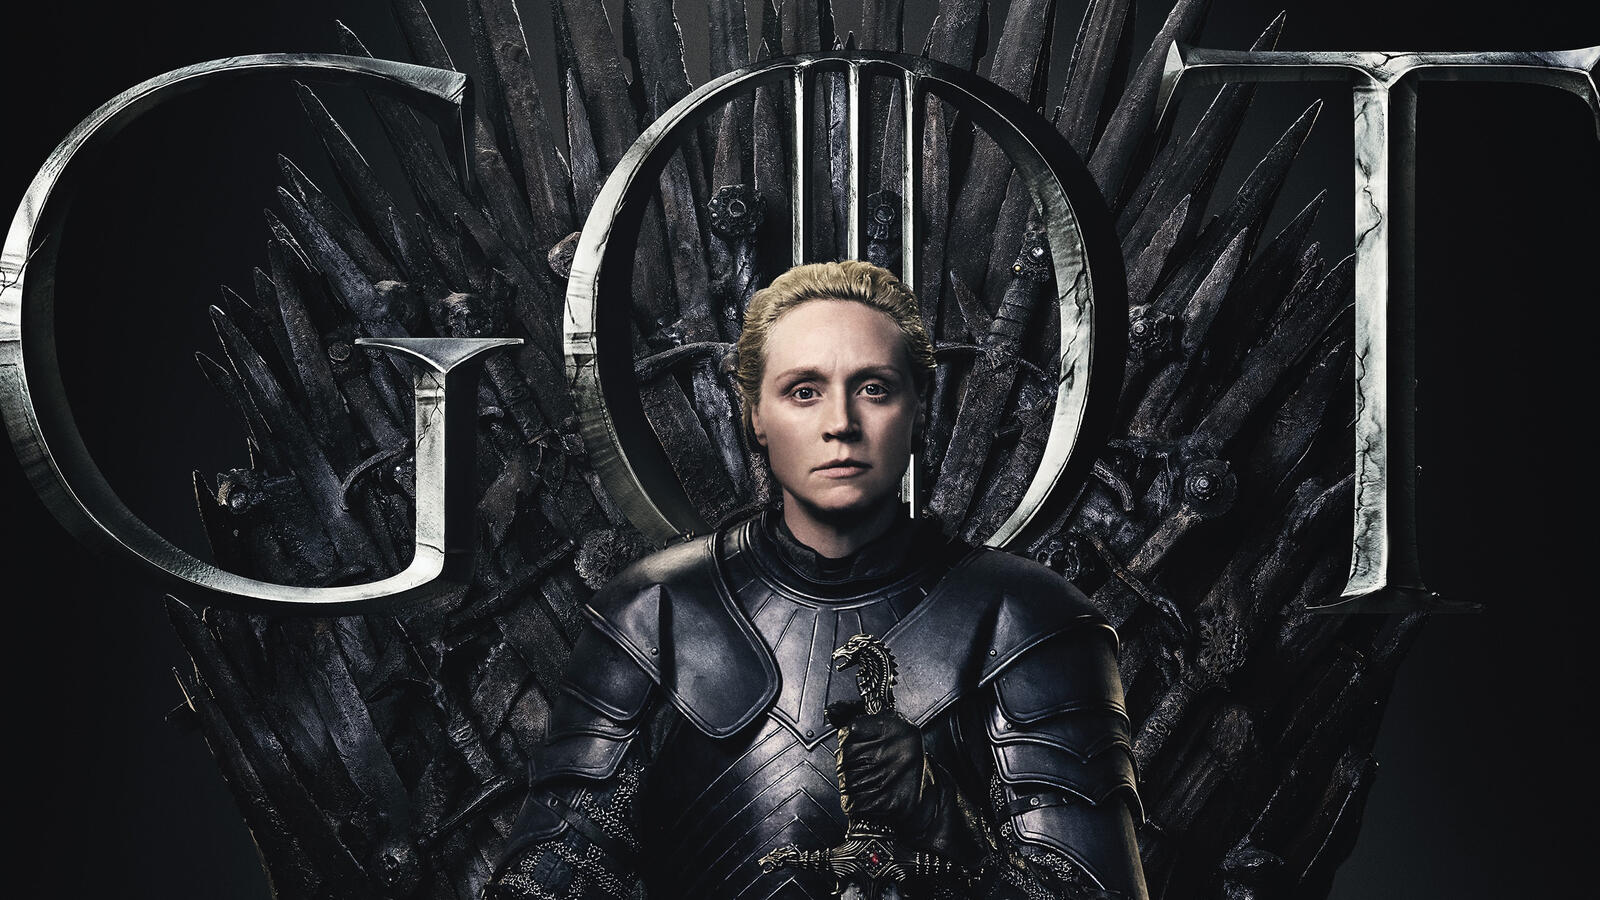 Wallpapers TV show brienne of tarth Game of Thrones season 8 on the desktop